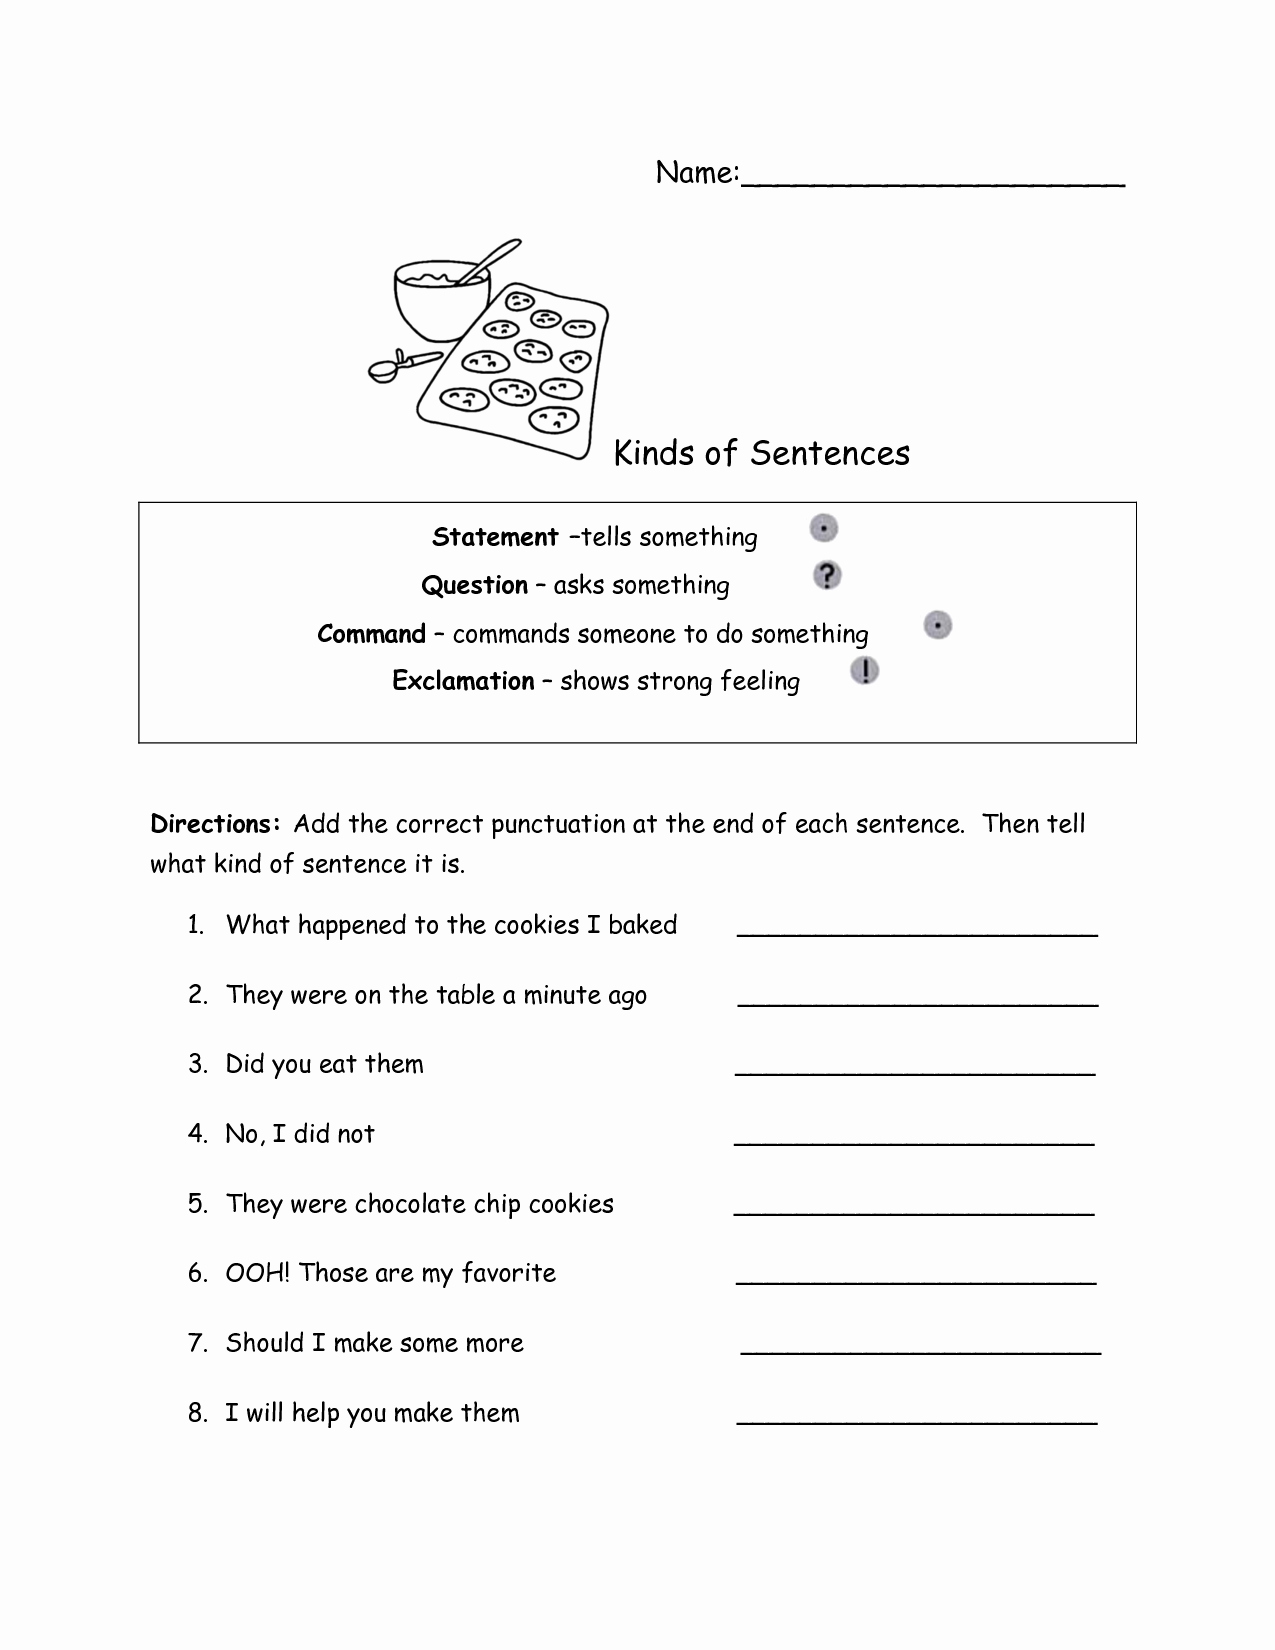 Four Kinds Of Sentences Worksheets Awesome 14 Best Of 4 Types Sentences Worksheets 4